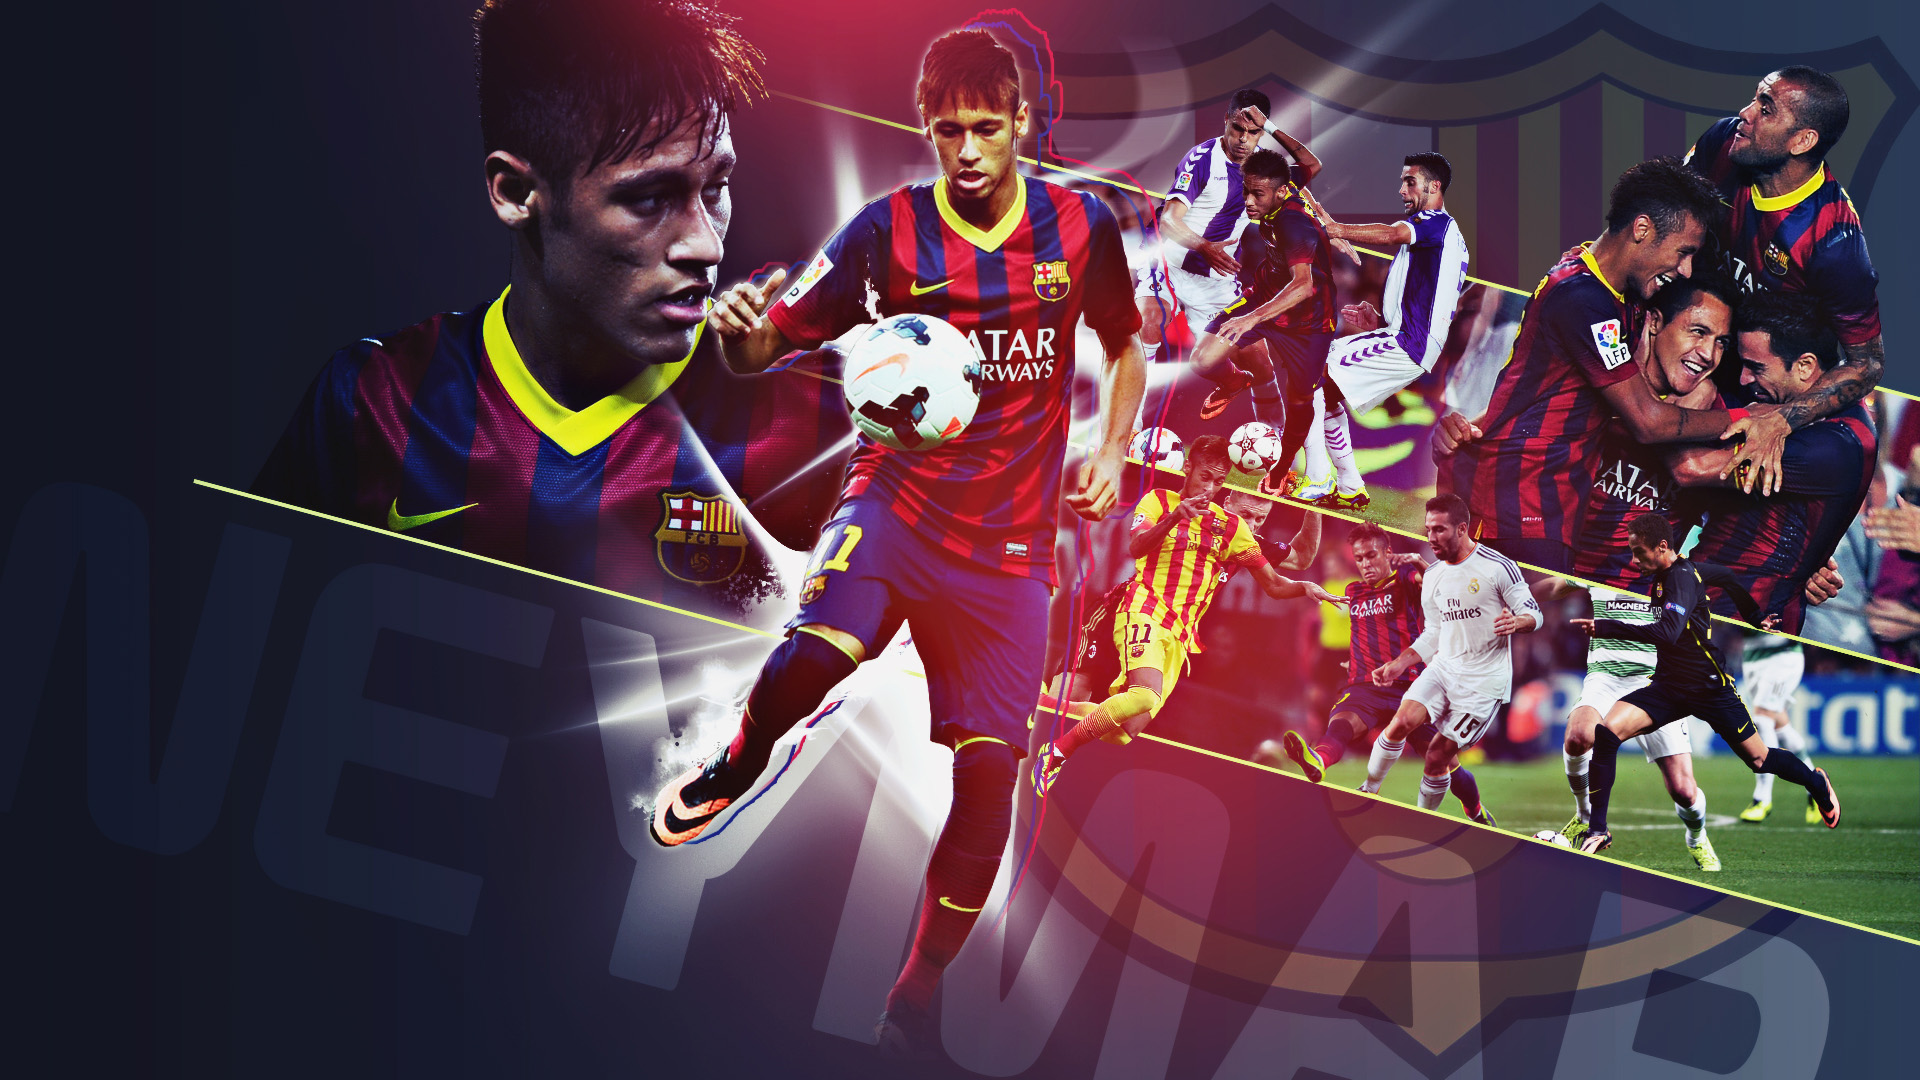 Free Download The Best Neymar Wallpapers Fc Barcelona And Brazil 19x1080 For Your Desktop Mobile Tablet Explore 48 Neymar Wallpaper Barcelona 15 Neymar Wallpaper Hd 16 Messi And Neymar